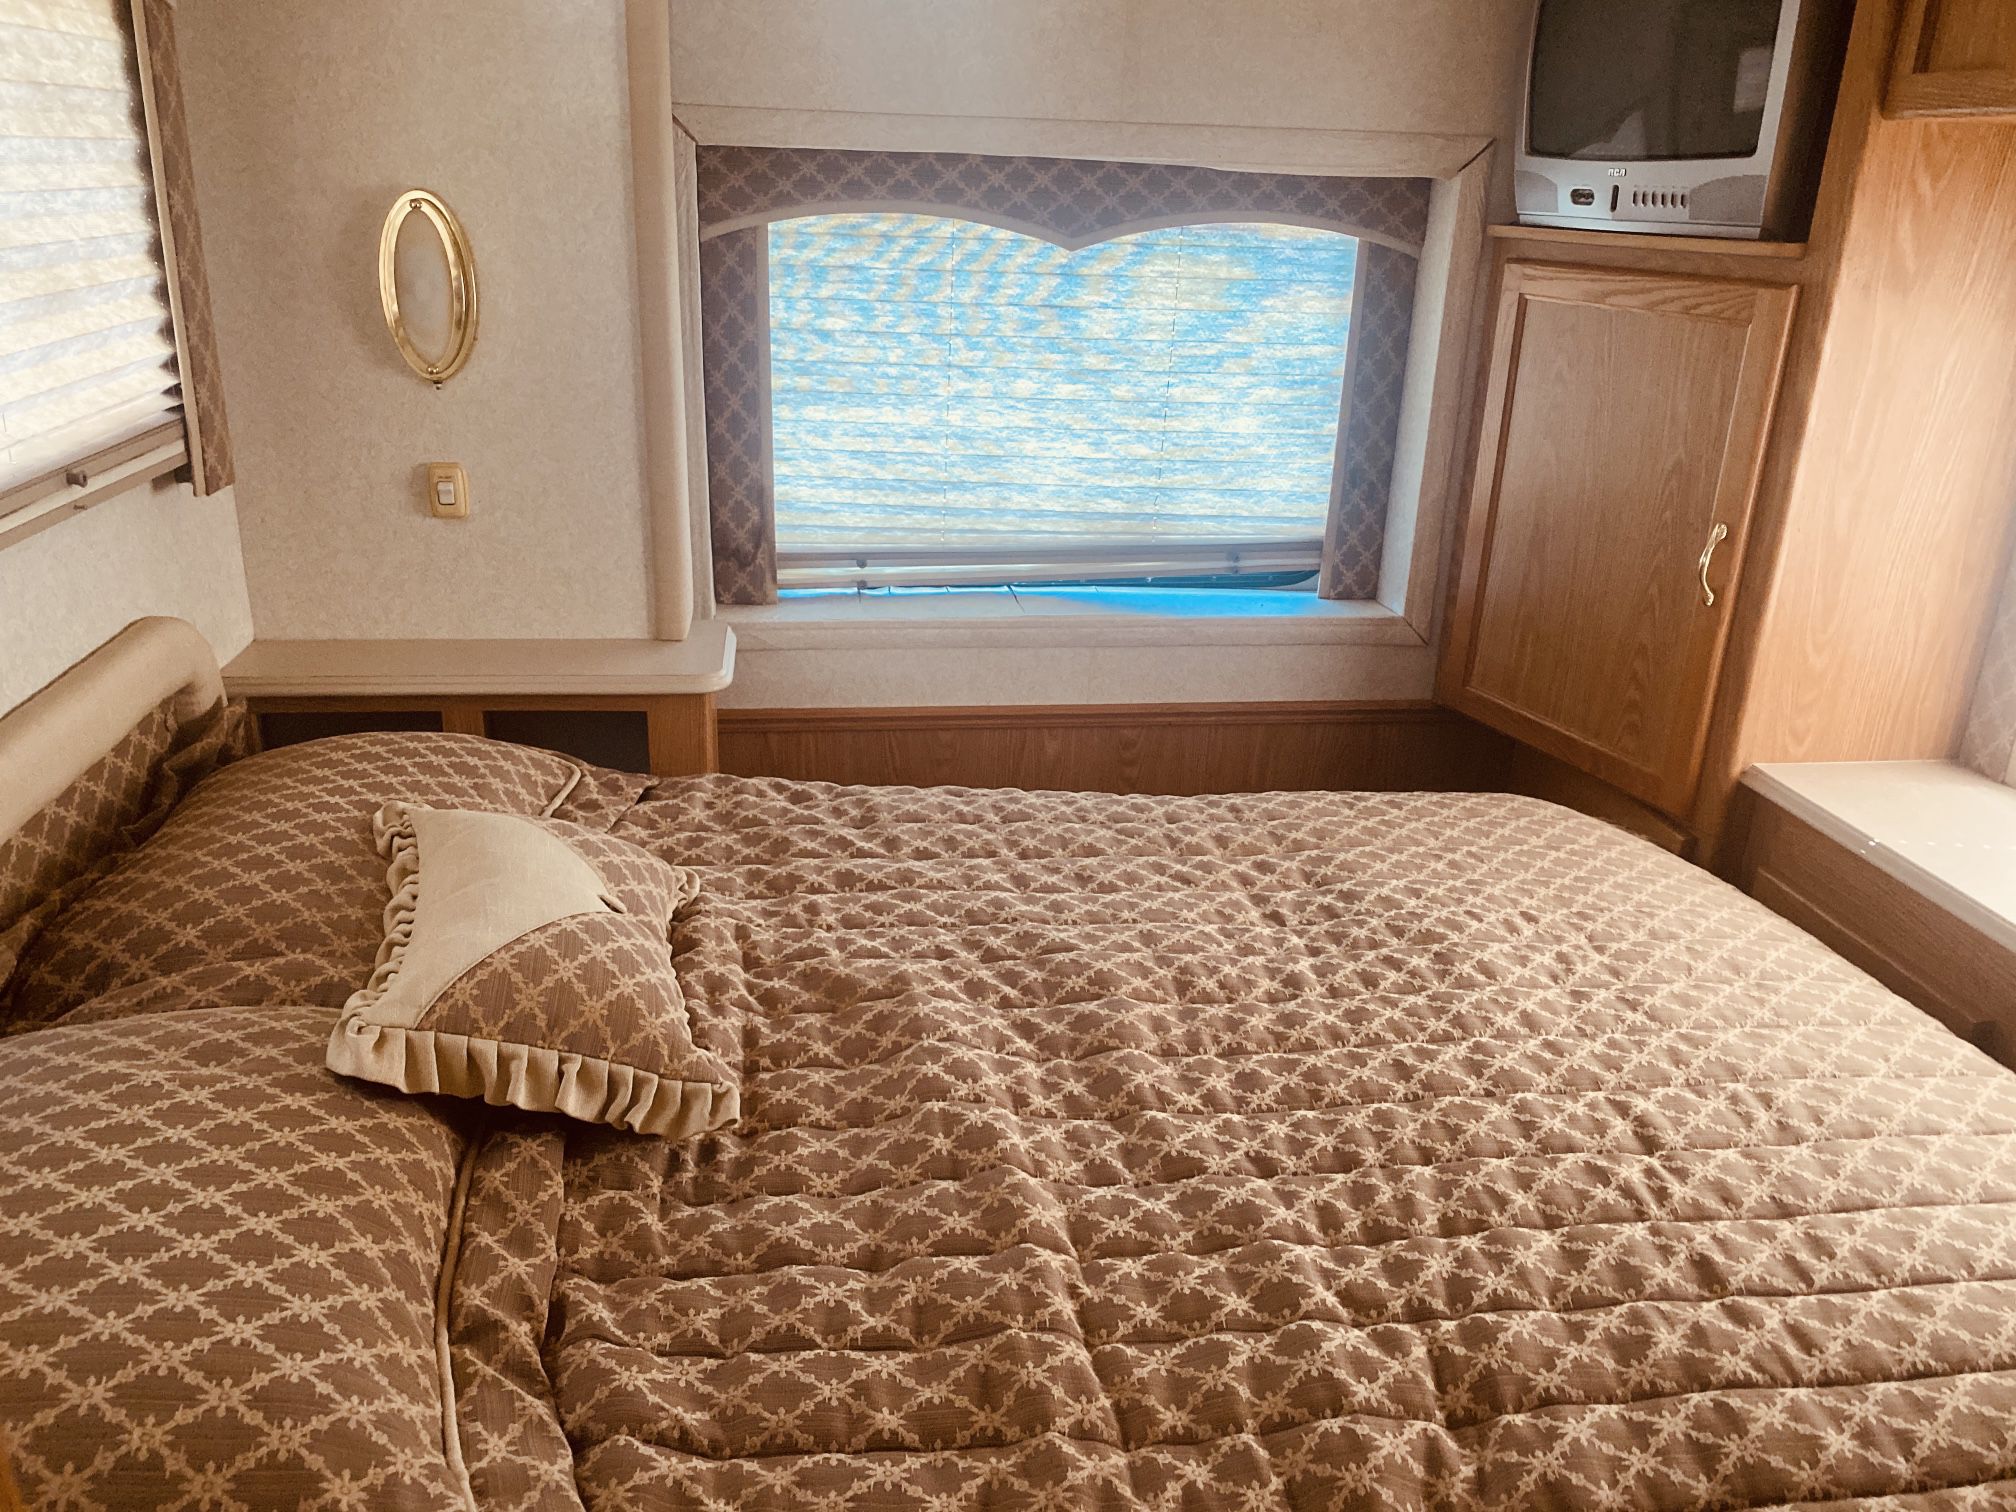 2004 Dolphin Motorhome 1 Owner